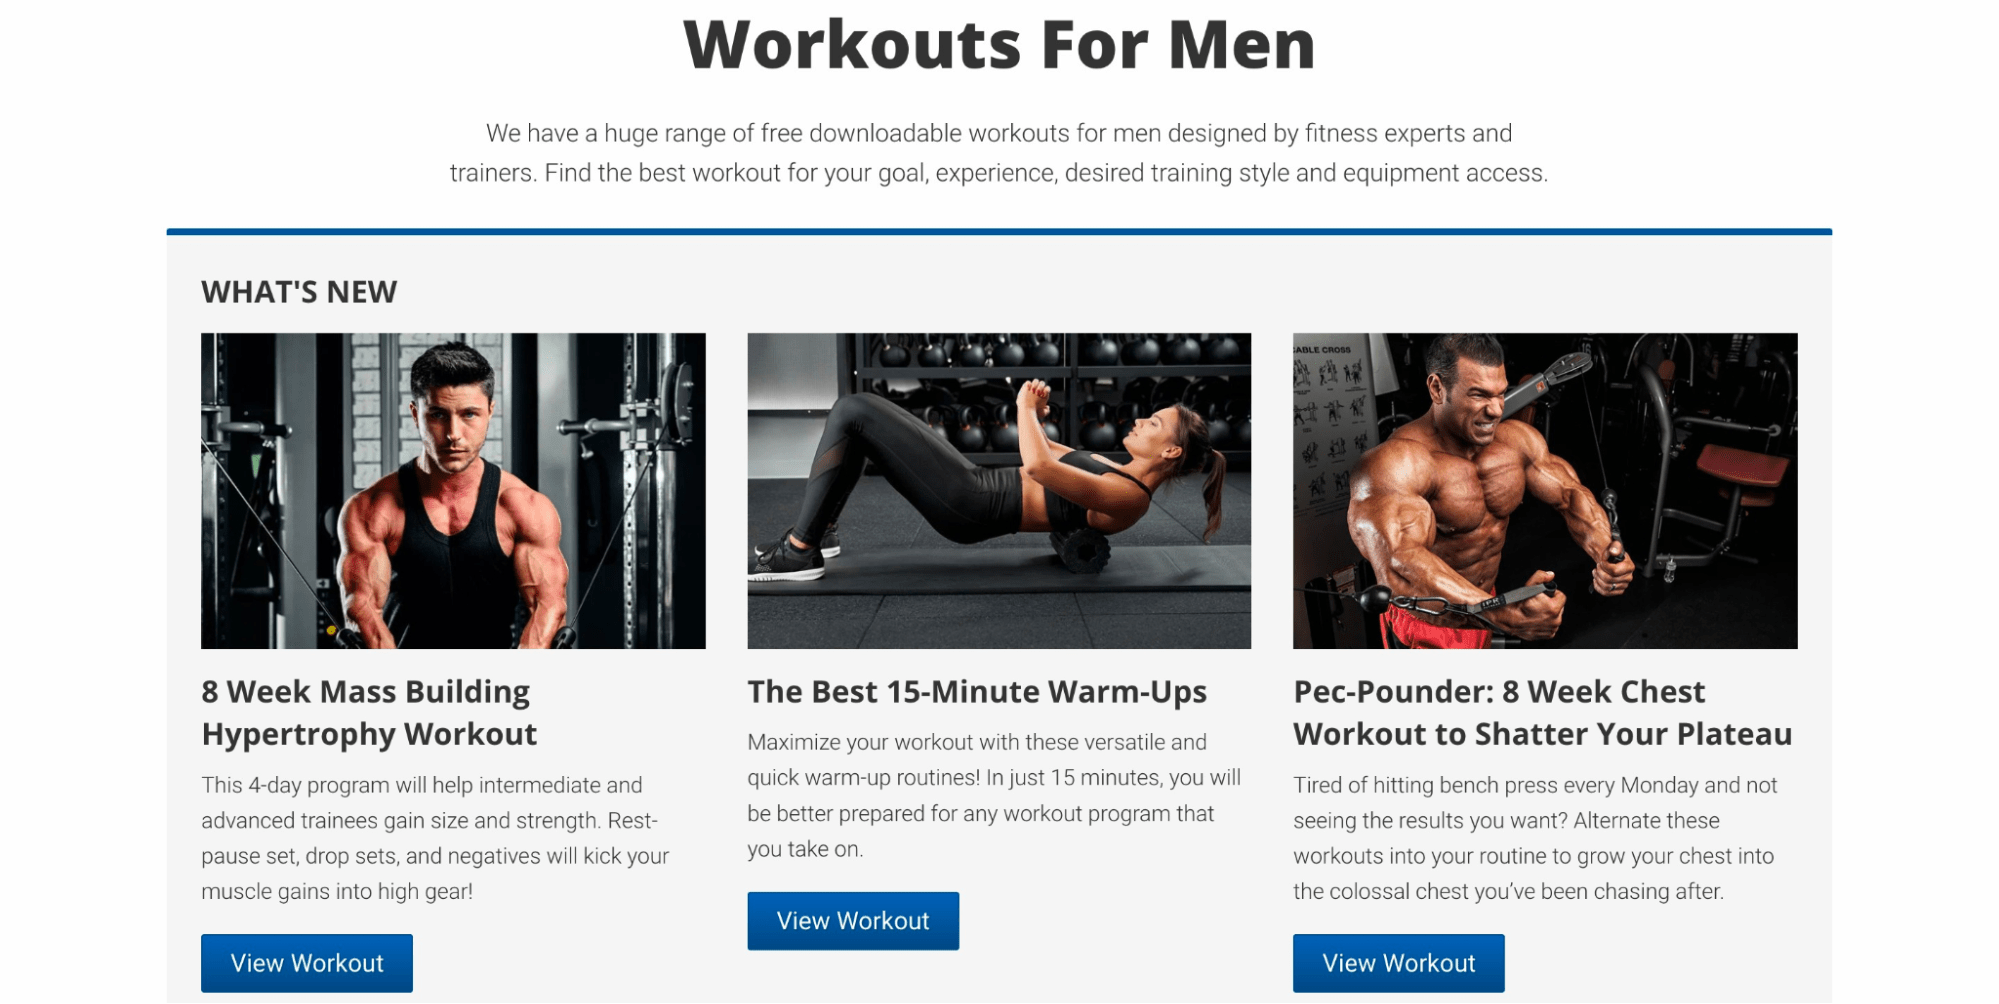 Types of workouts for men (in grid format)
